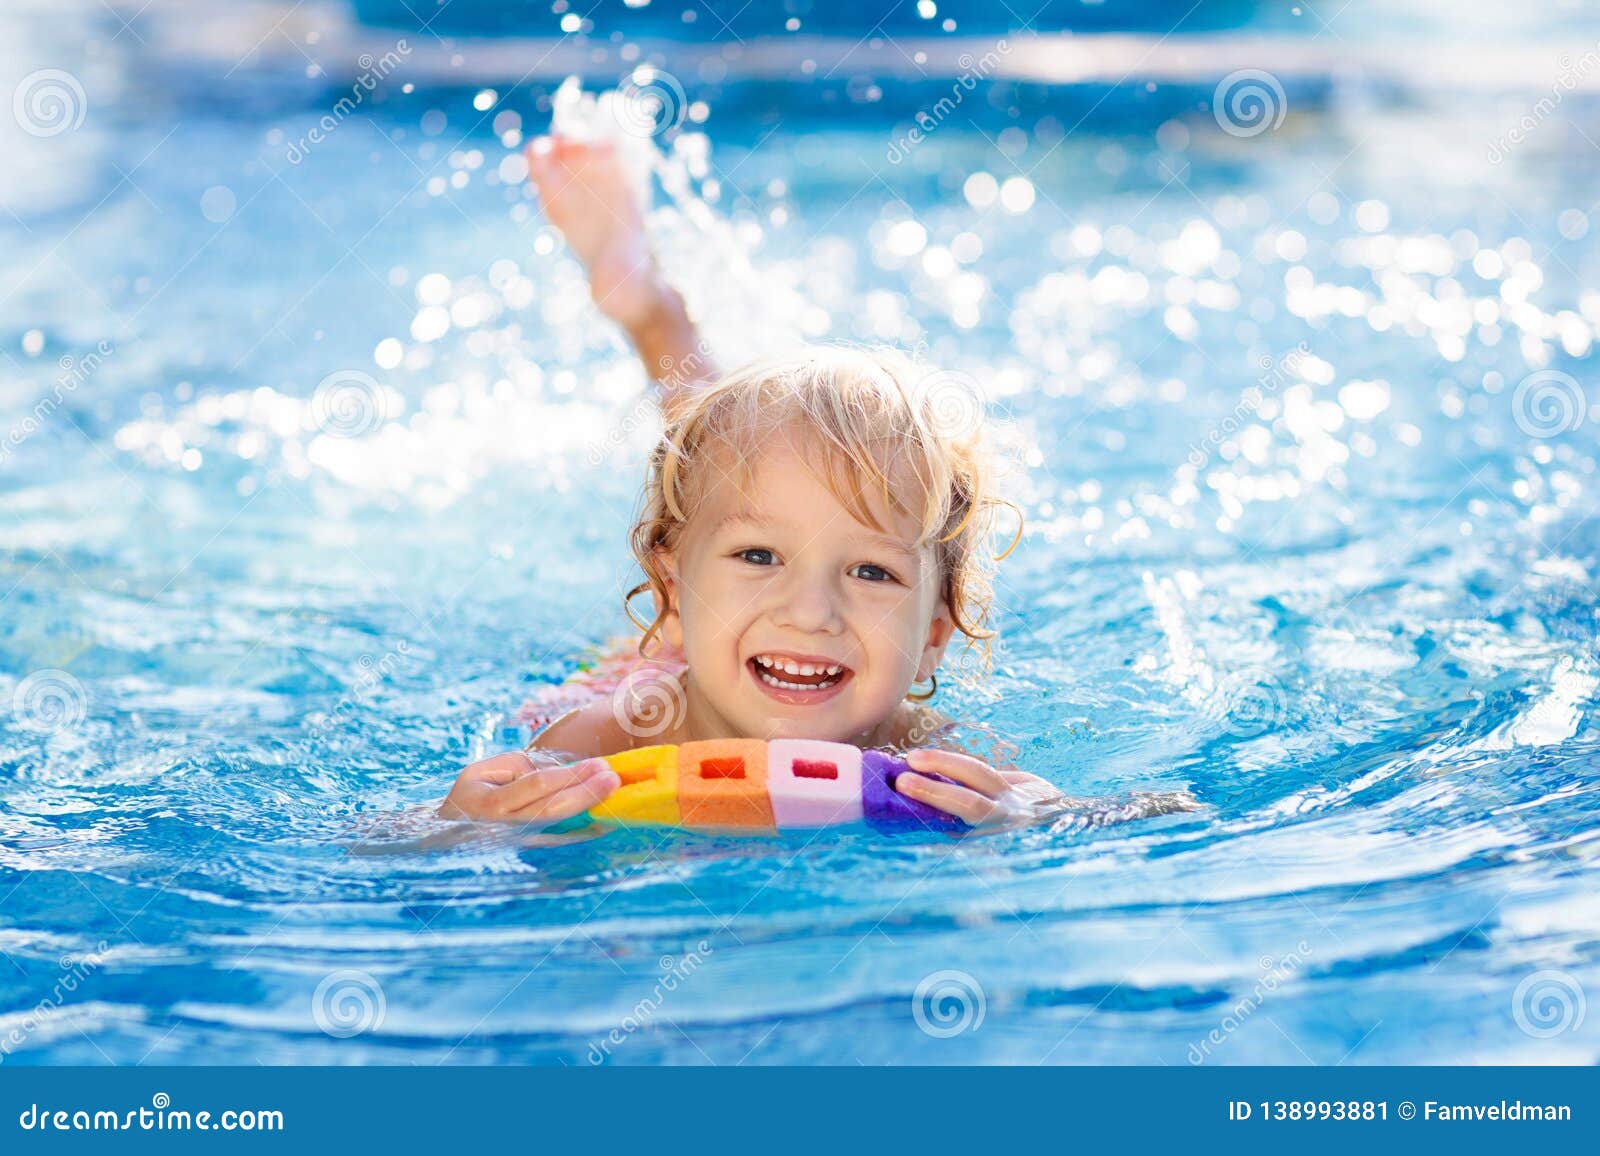 child learning to swim. kids in swimming pool